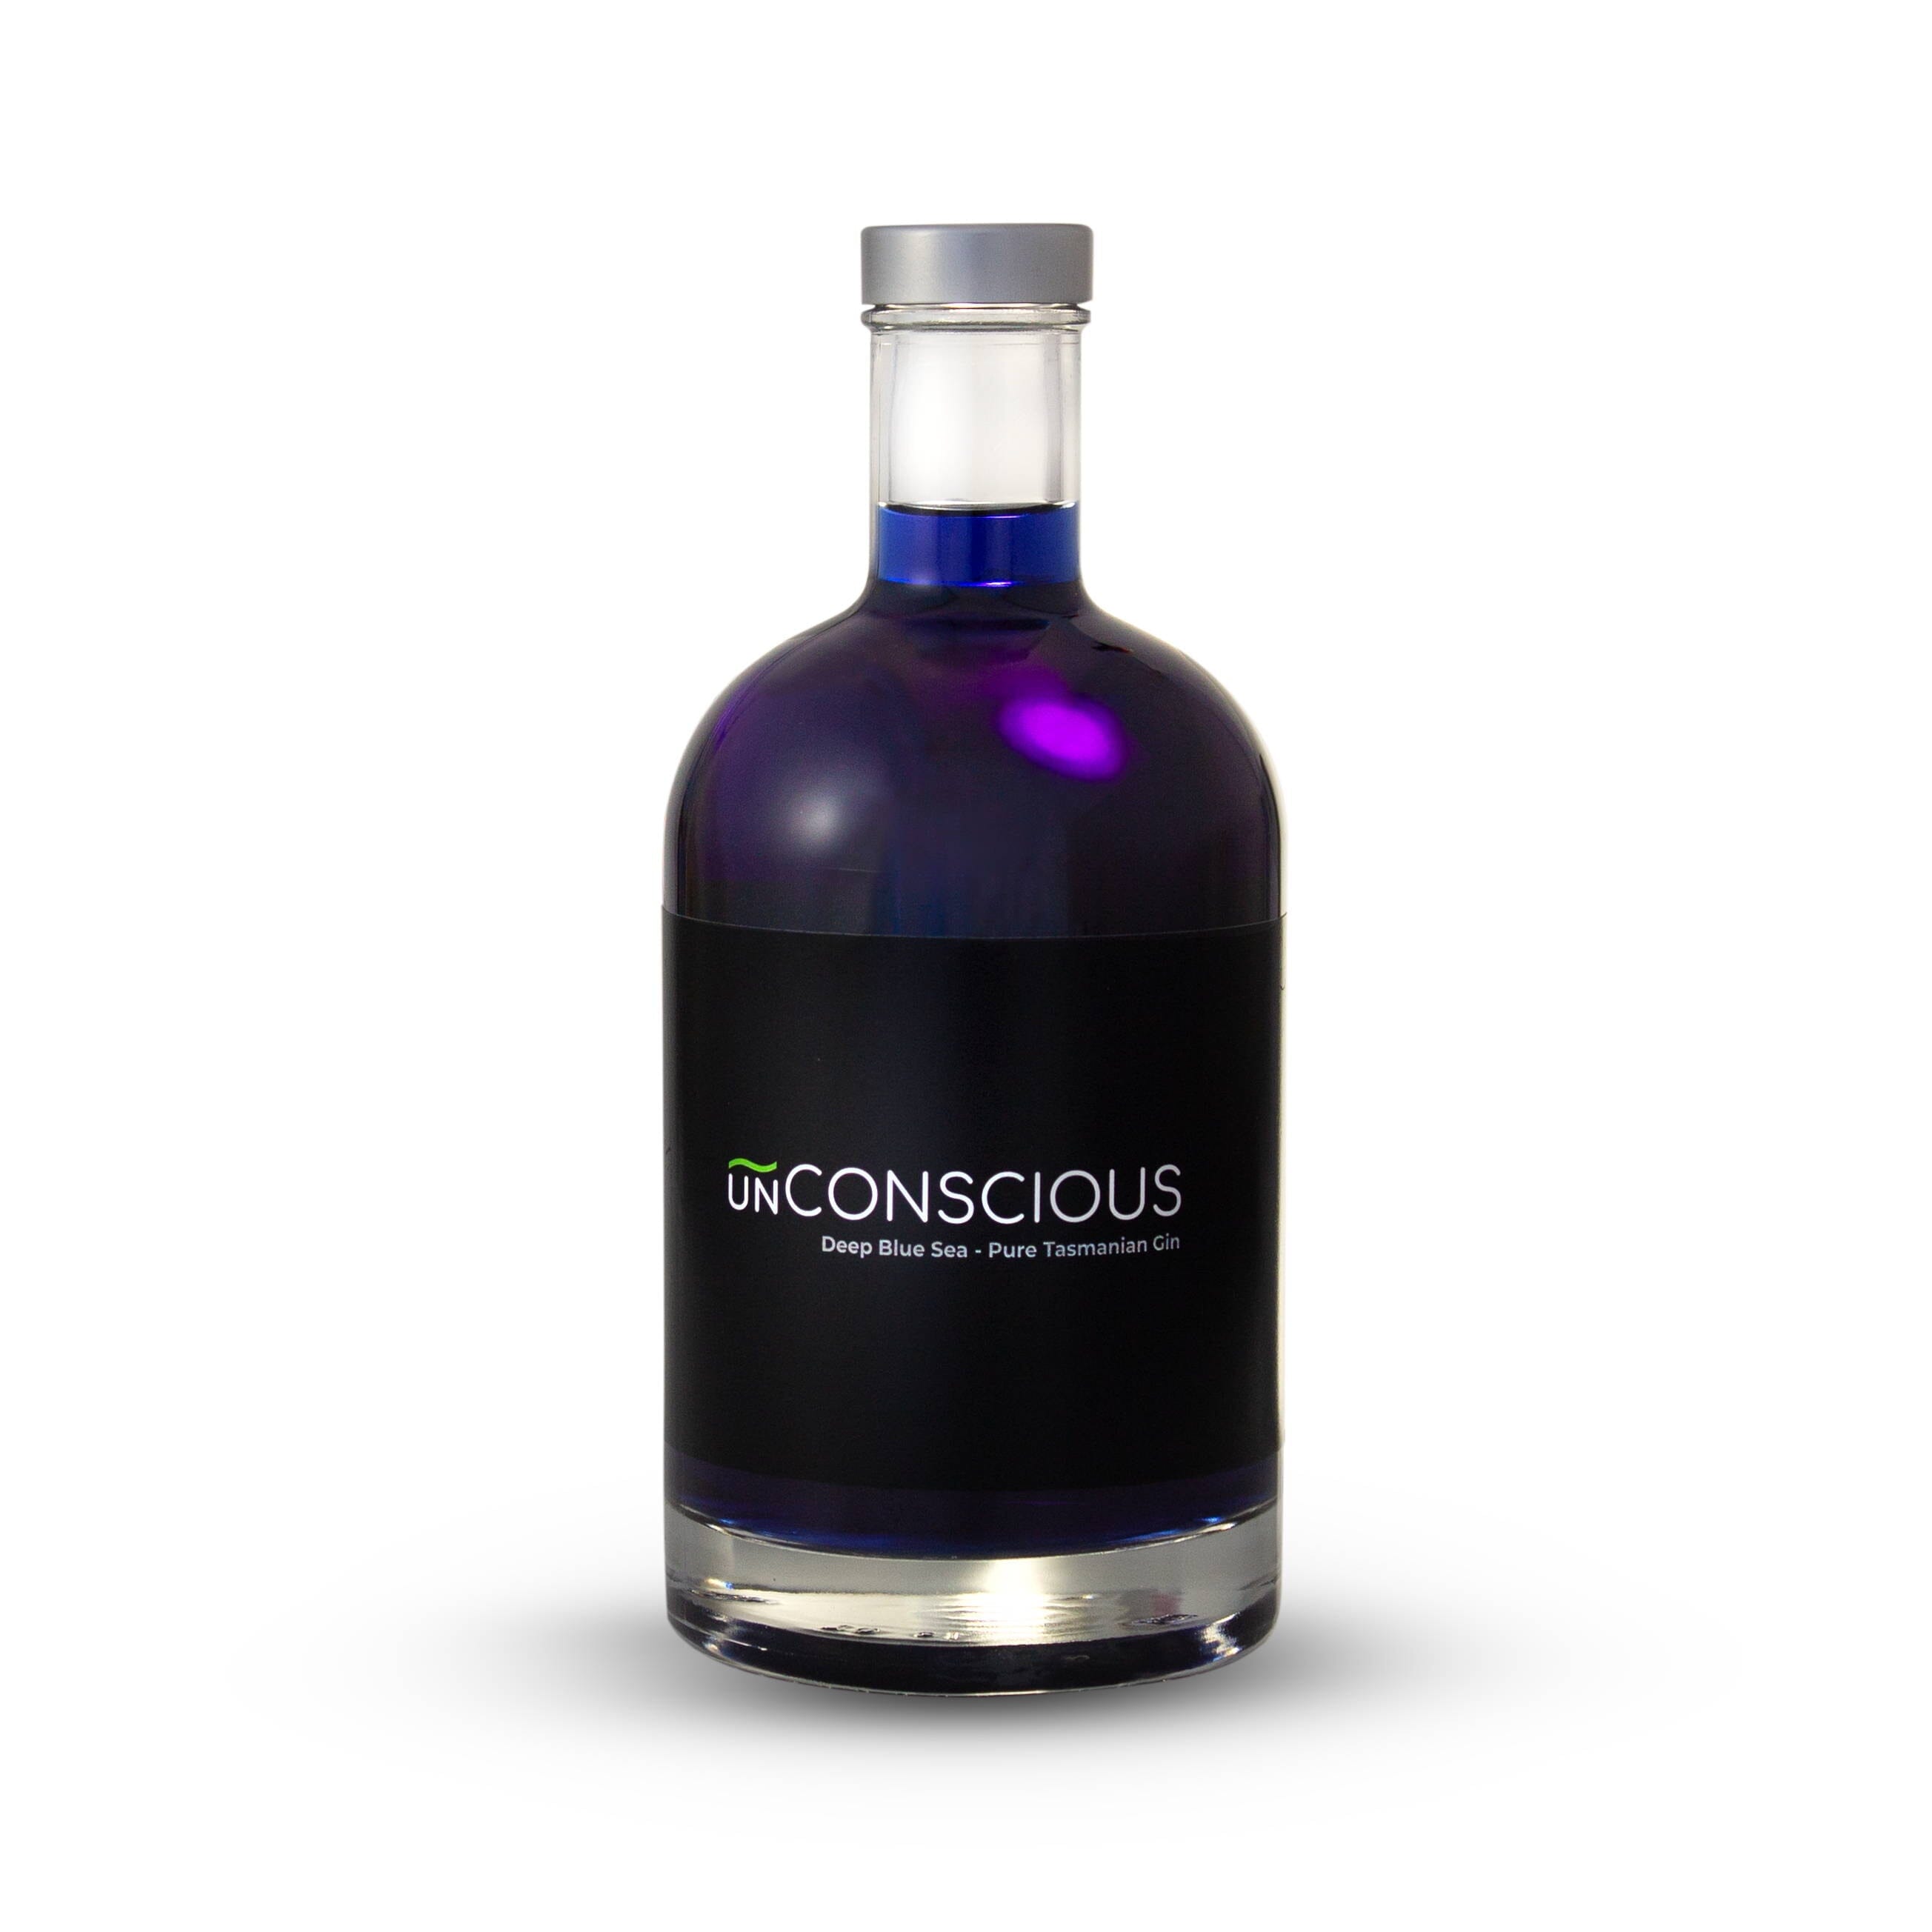 A bottle of Deep Blue Sea gin on a white background. It is a deep blue spirit and clear bottle, with a simple black label that has the logo on it. 